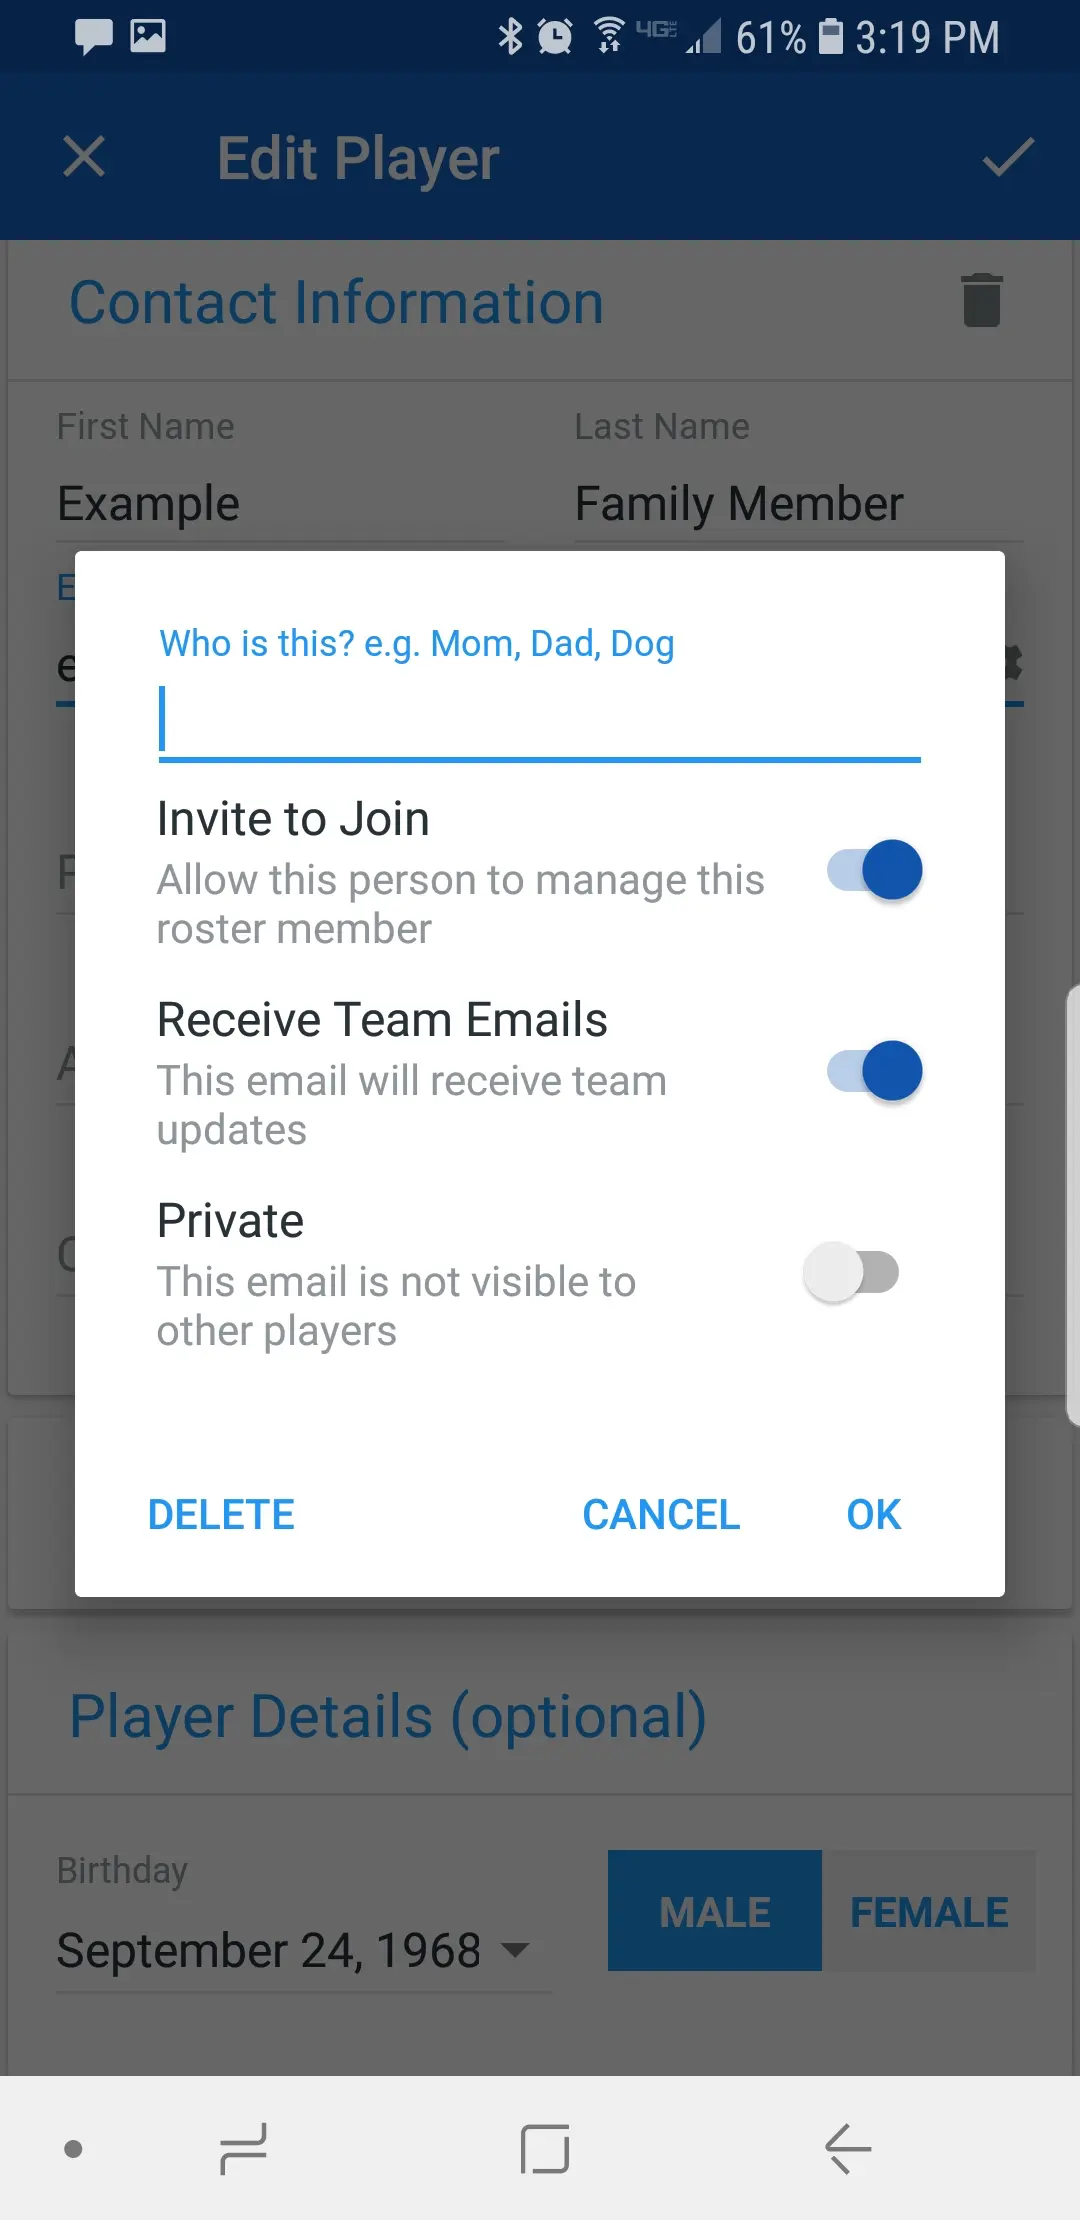 Featured image: How to Add Contacts and Family to Your Roster Profile